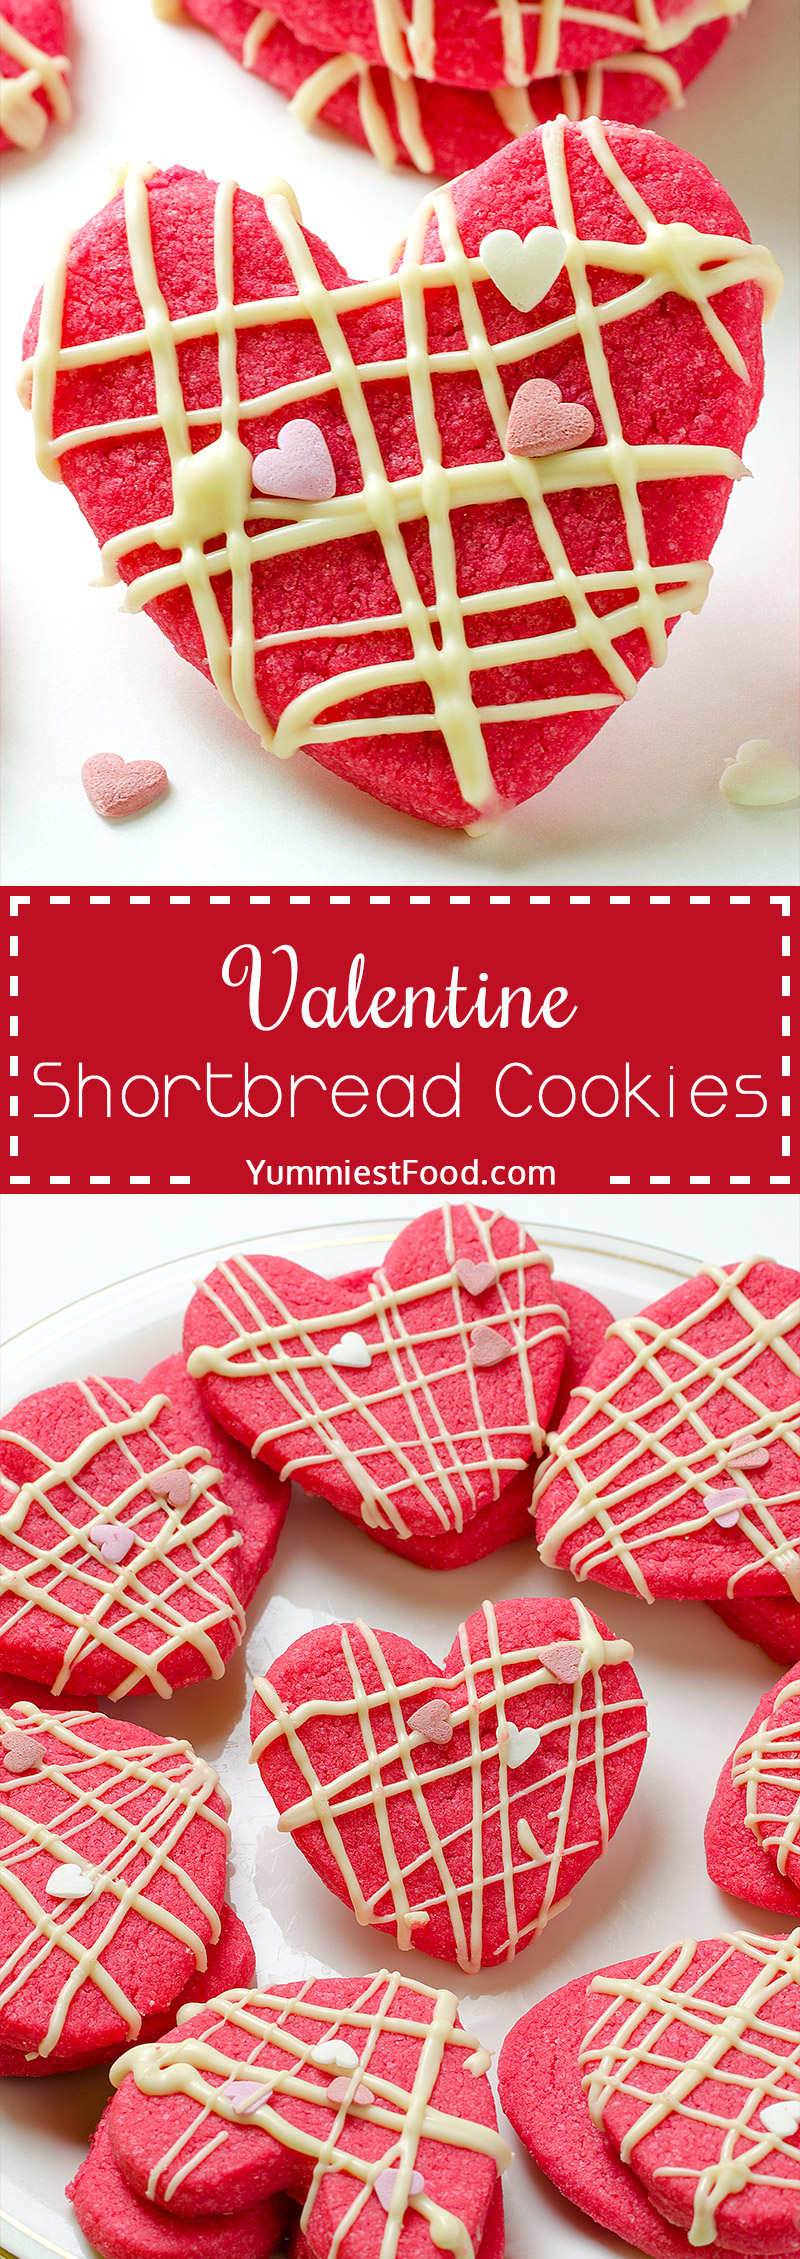 Valentine Shortbread Cookies – Make these delicious Valentine Shortbread Cookies and spend perfect moments with your partner.